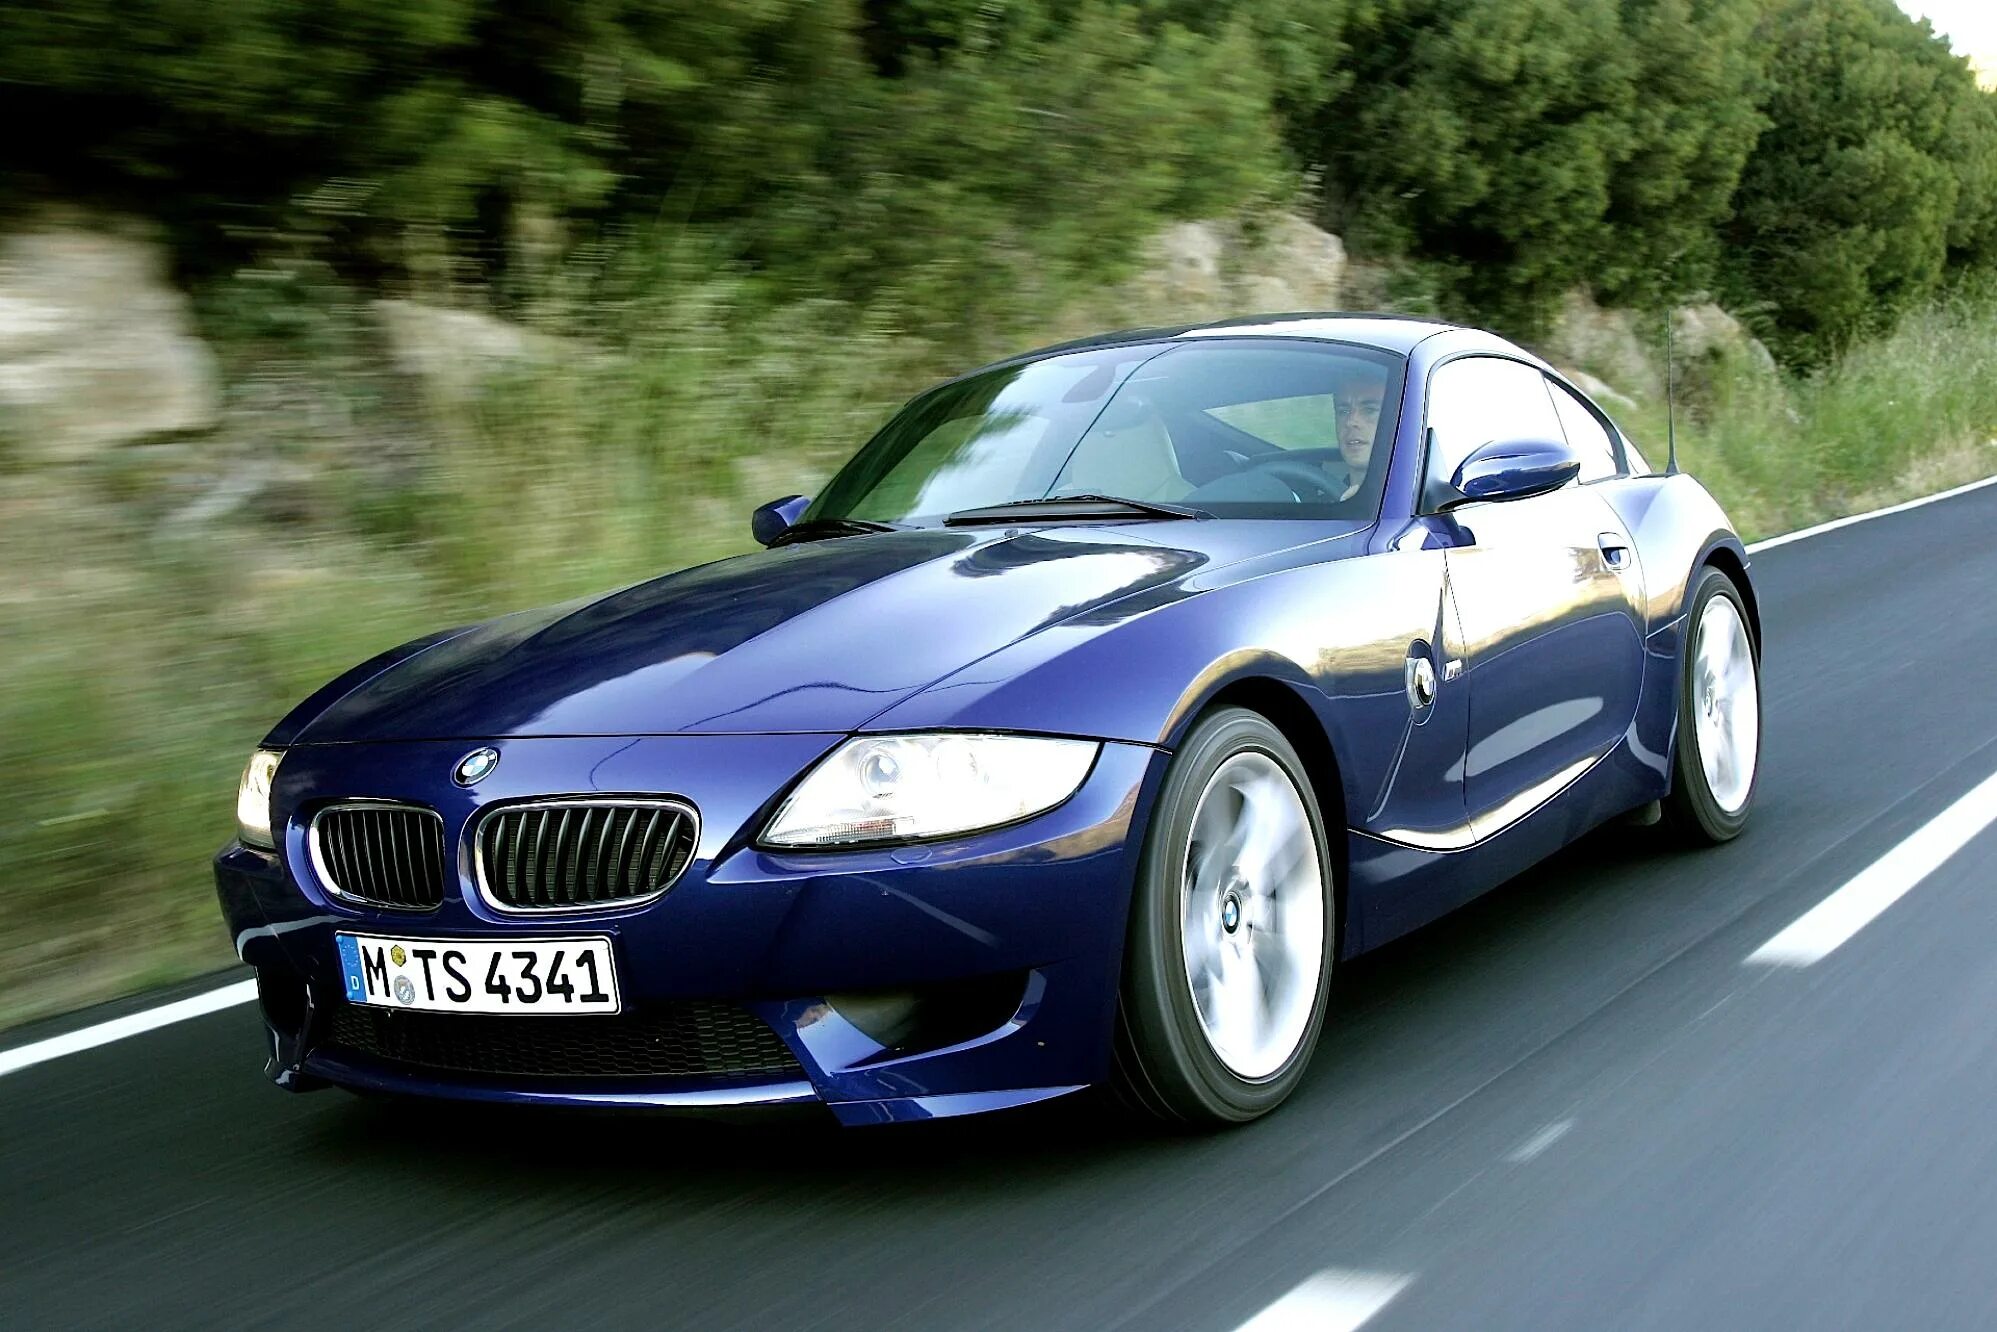 BMW z4 m Coupe. 2008 BMW z4 m Coupe. BMW z4 Coupe 2006. BMW z4 e85 Coupe.